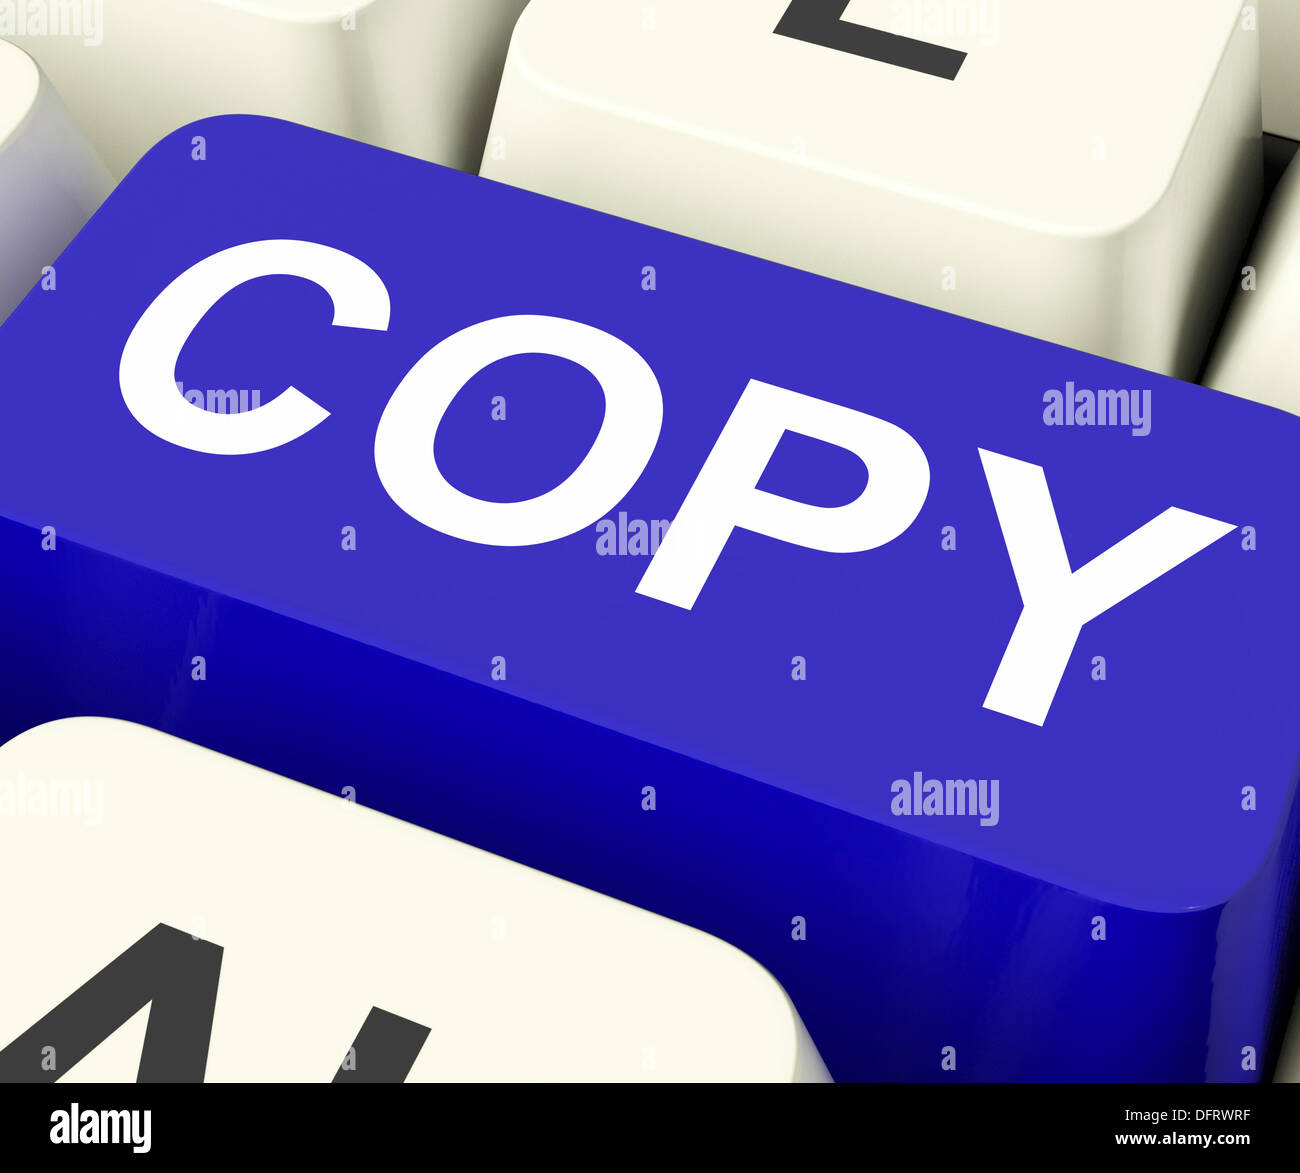 Copy Keys Meaning Duplication Replication Or Copying Stock Photo